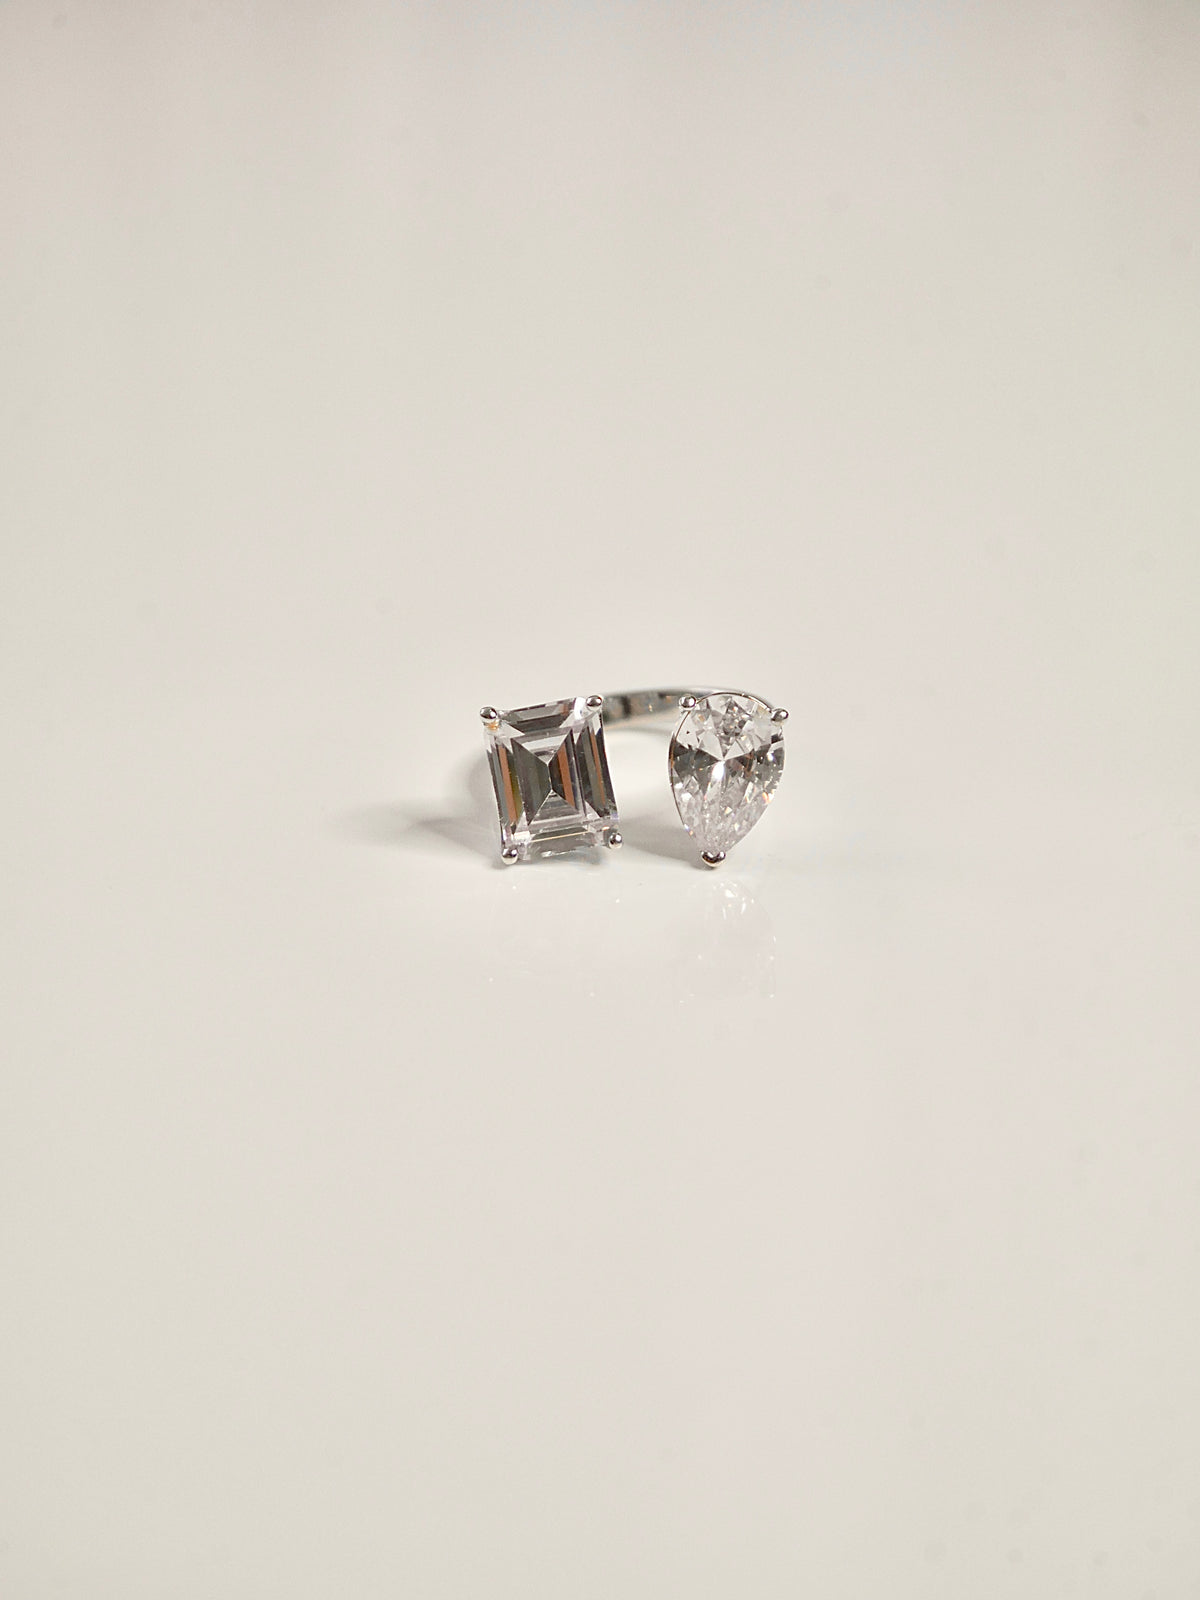 Double Zircon Statement Ring,  .925 Sterling Silver Pear and Square Zircon Adjustable Ring